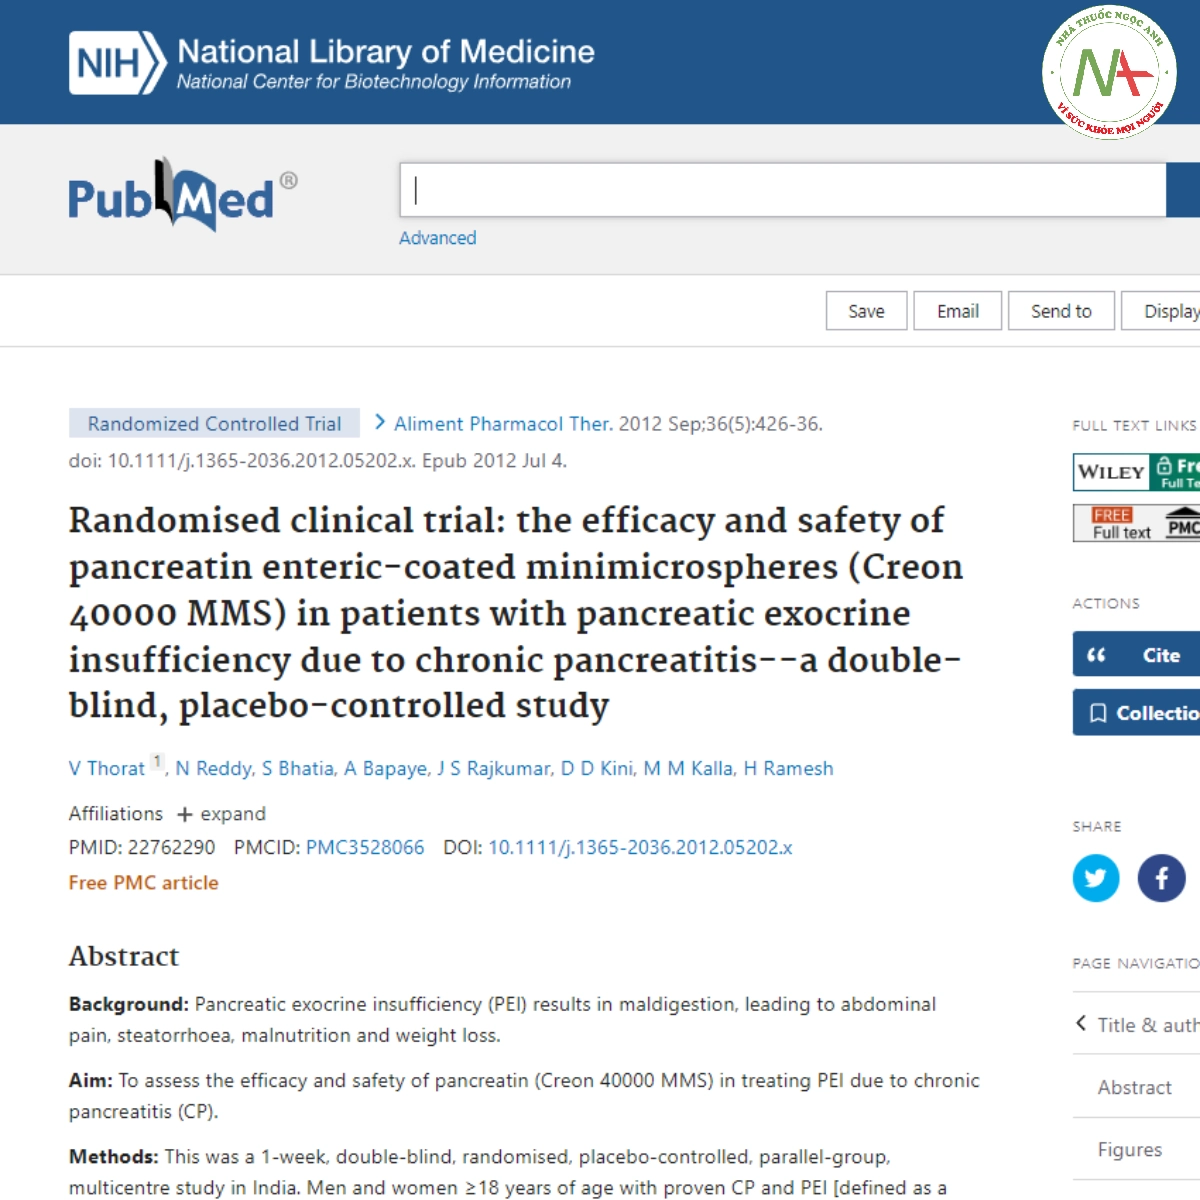 Randomised clinical trial: the efficacy and safety of pancreatin enteric-coated minimicrospheres (Creon 40000 MMS) in patients with pancreatic exocrine insufficiency due to chronic pancreatitis--a double-blind, placebo-controlled study